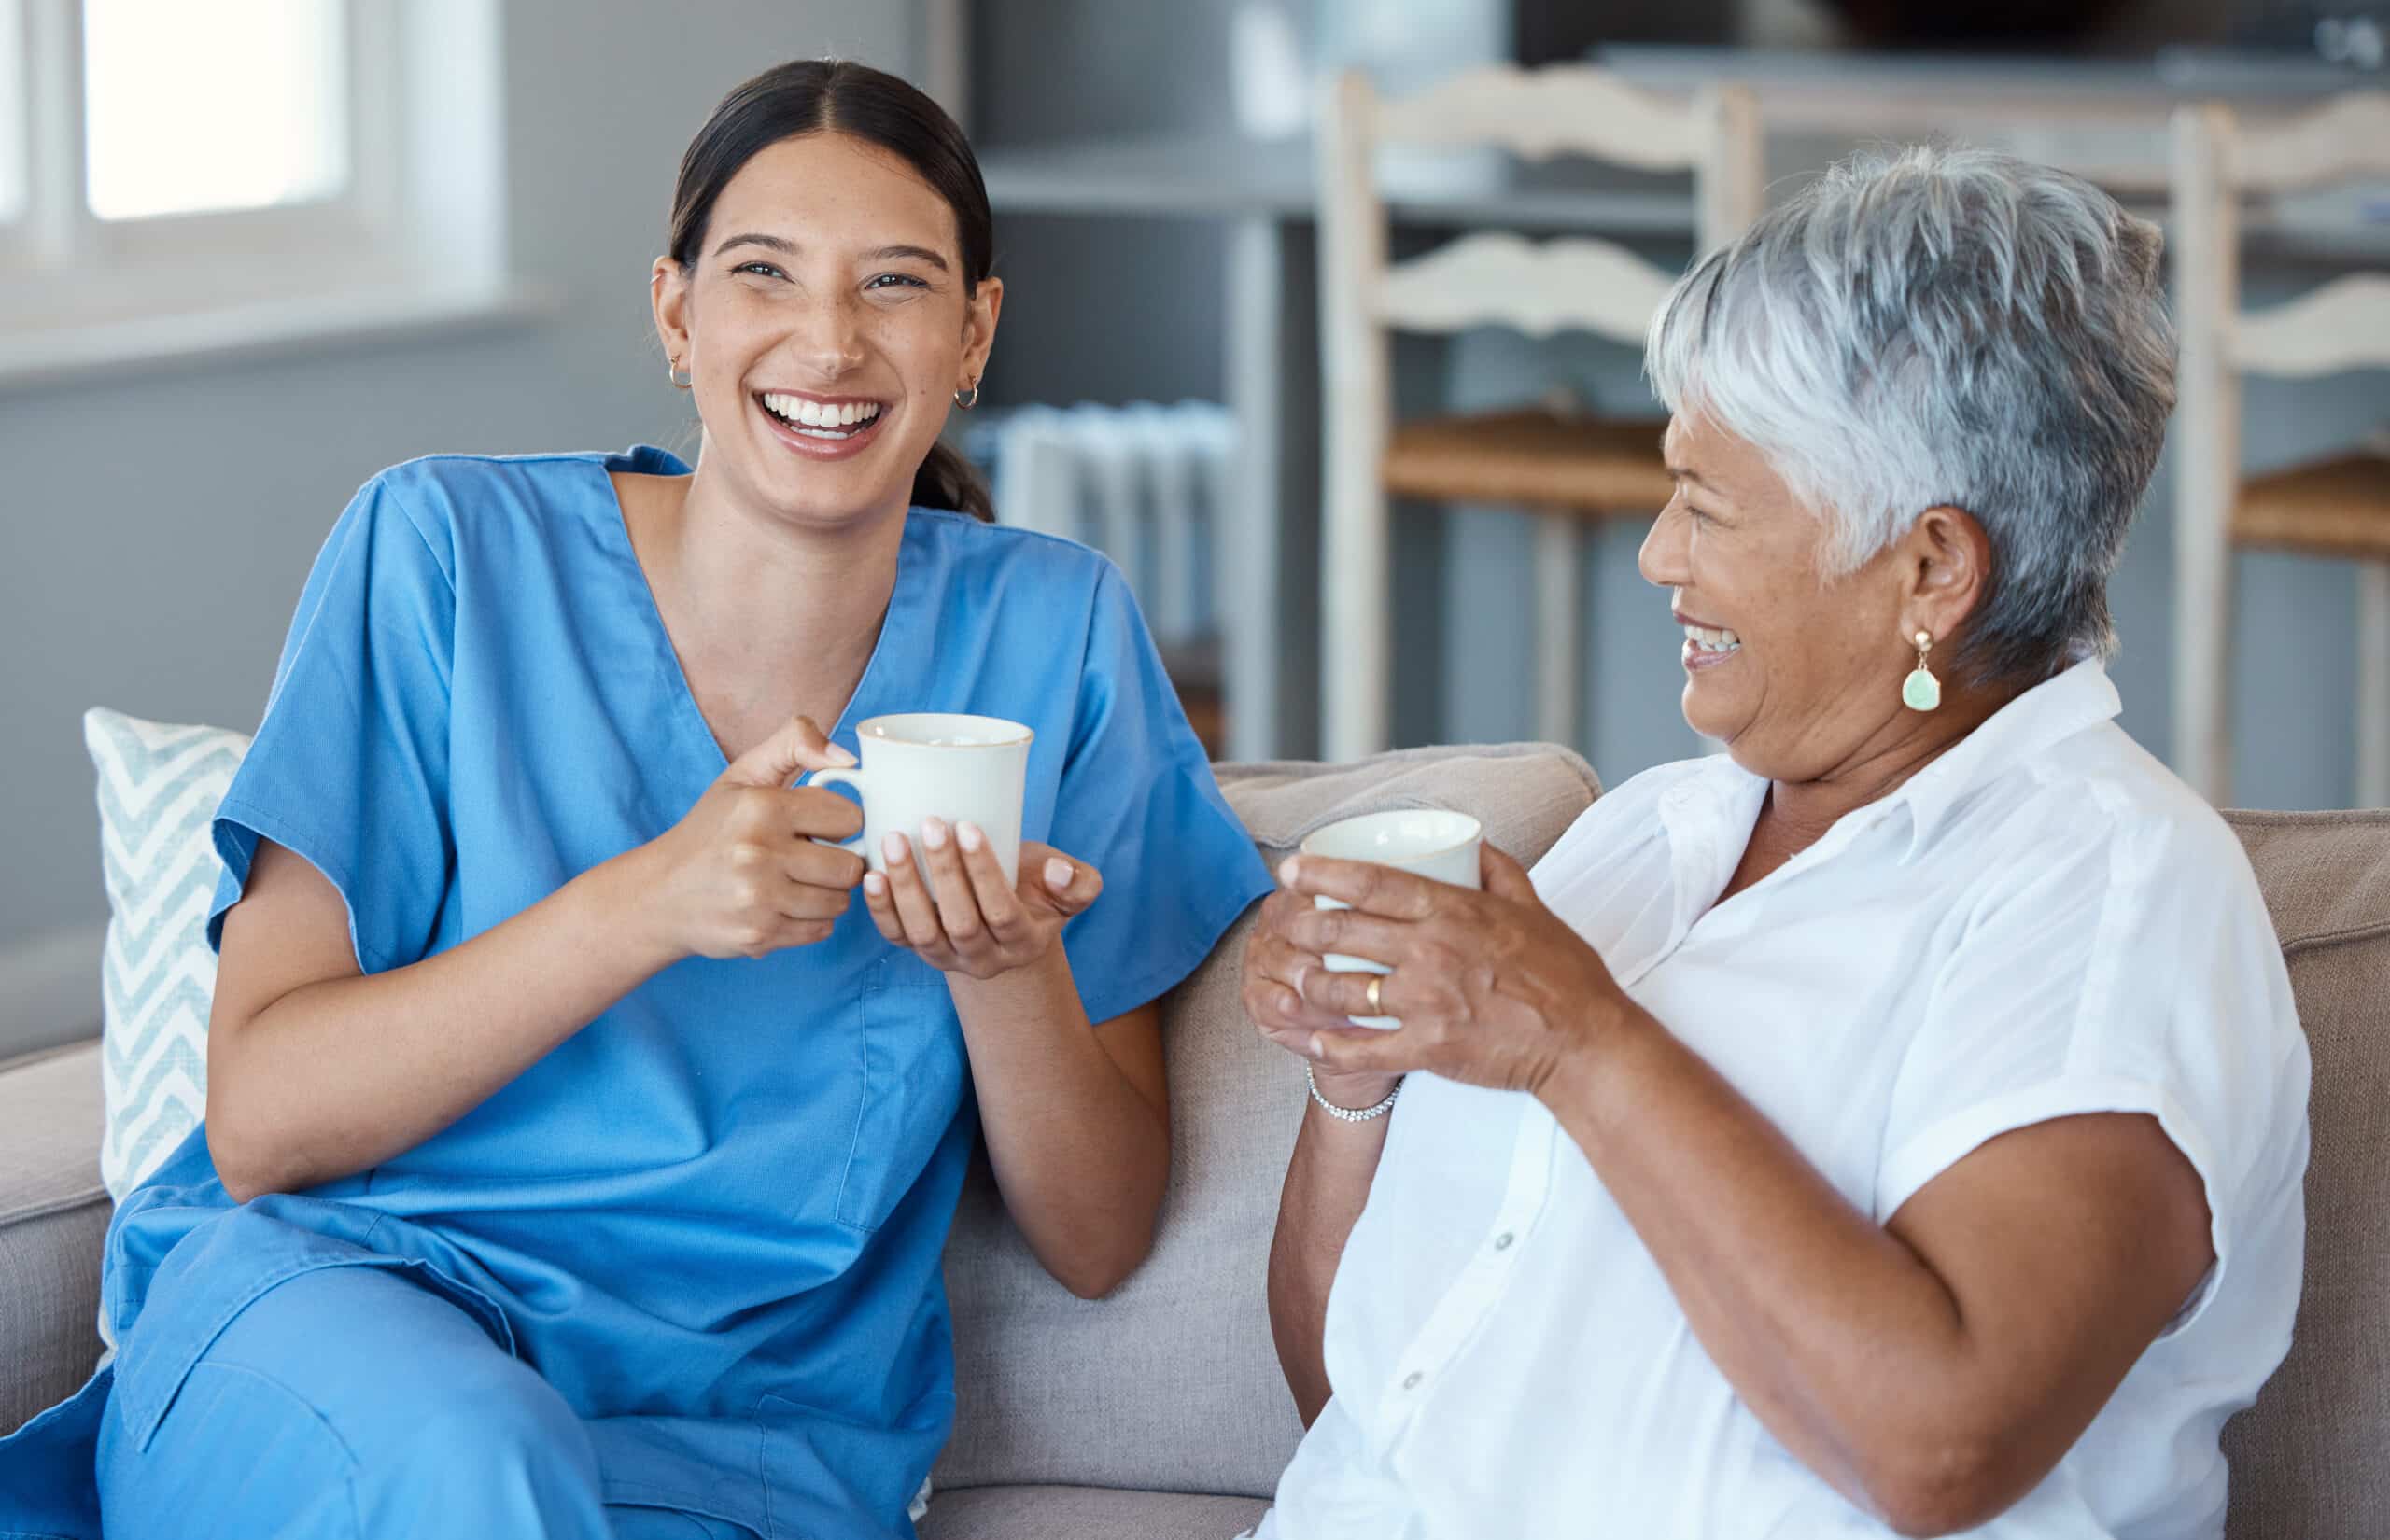 nurse and woman having coffee and laughing